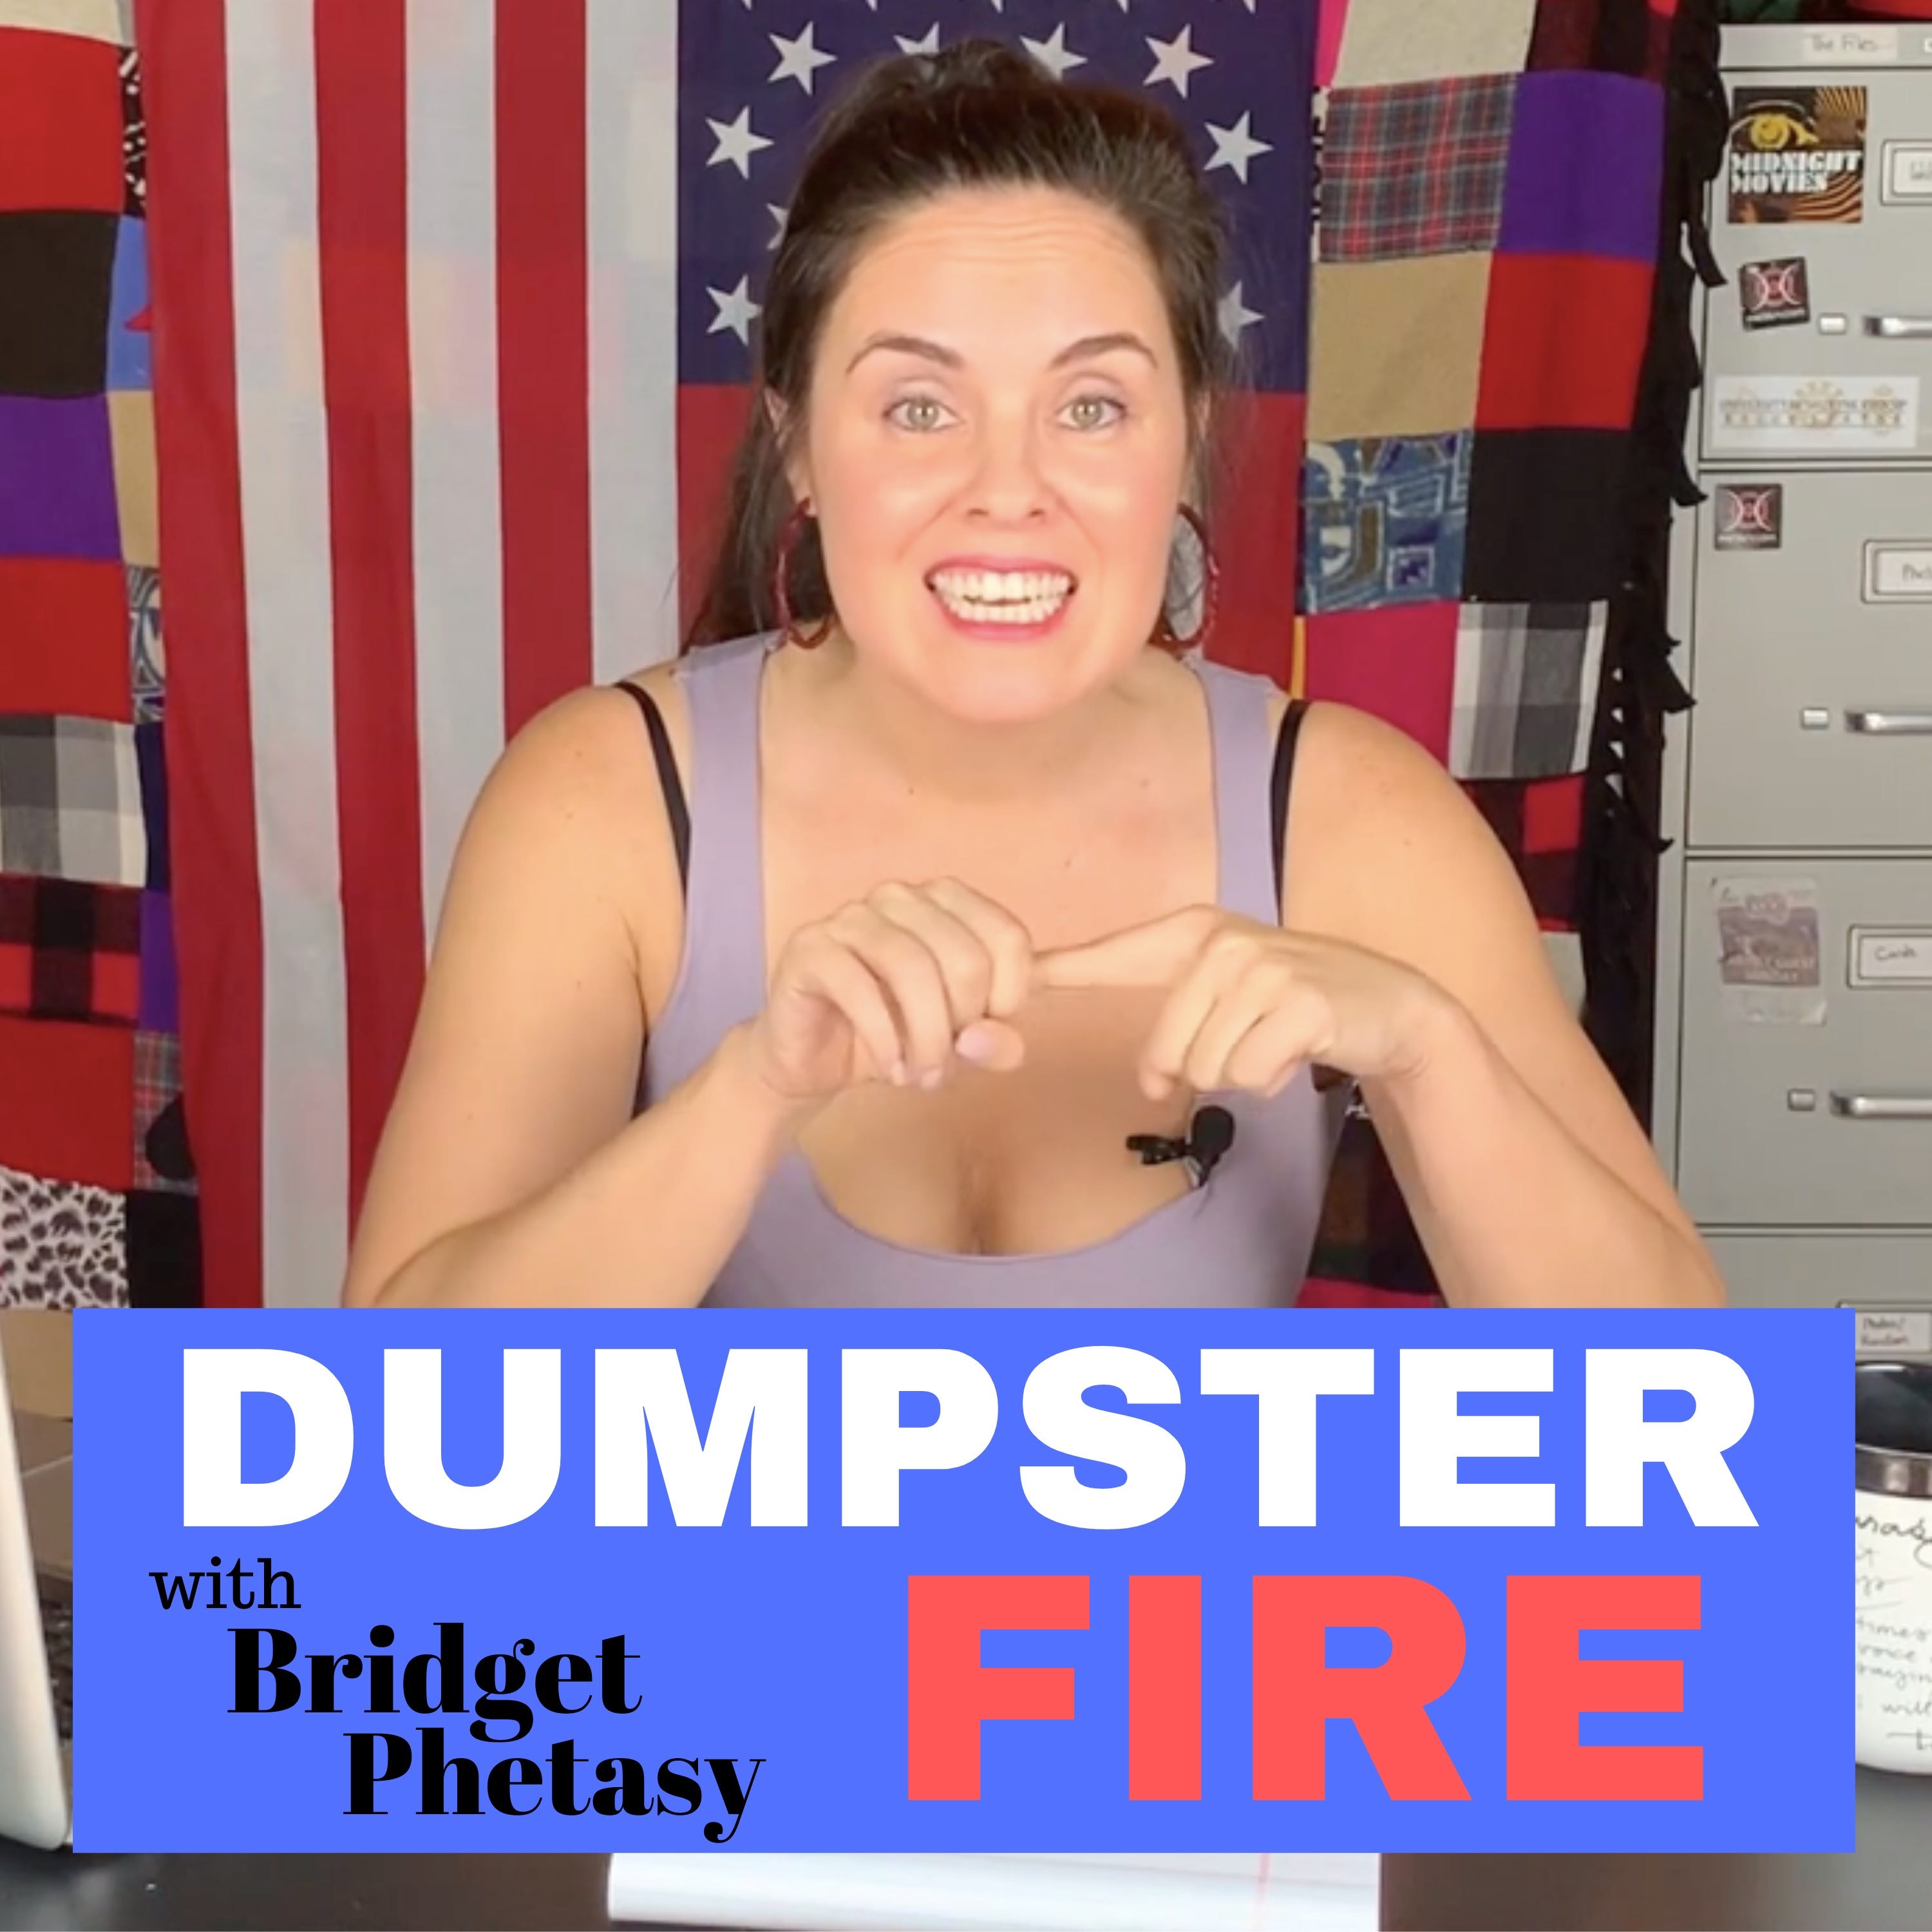 Dumpster Fire 2: Murdered by Sex Robots? Yes, Please.